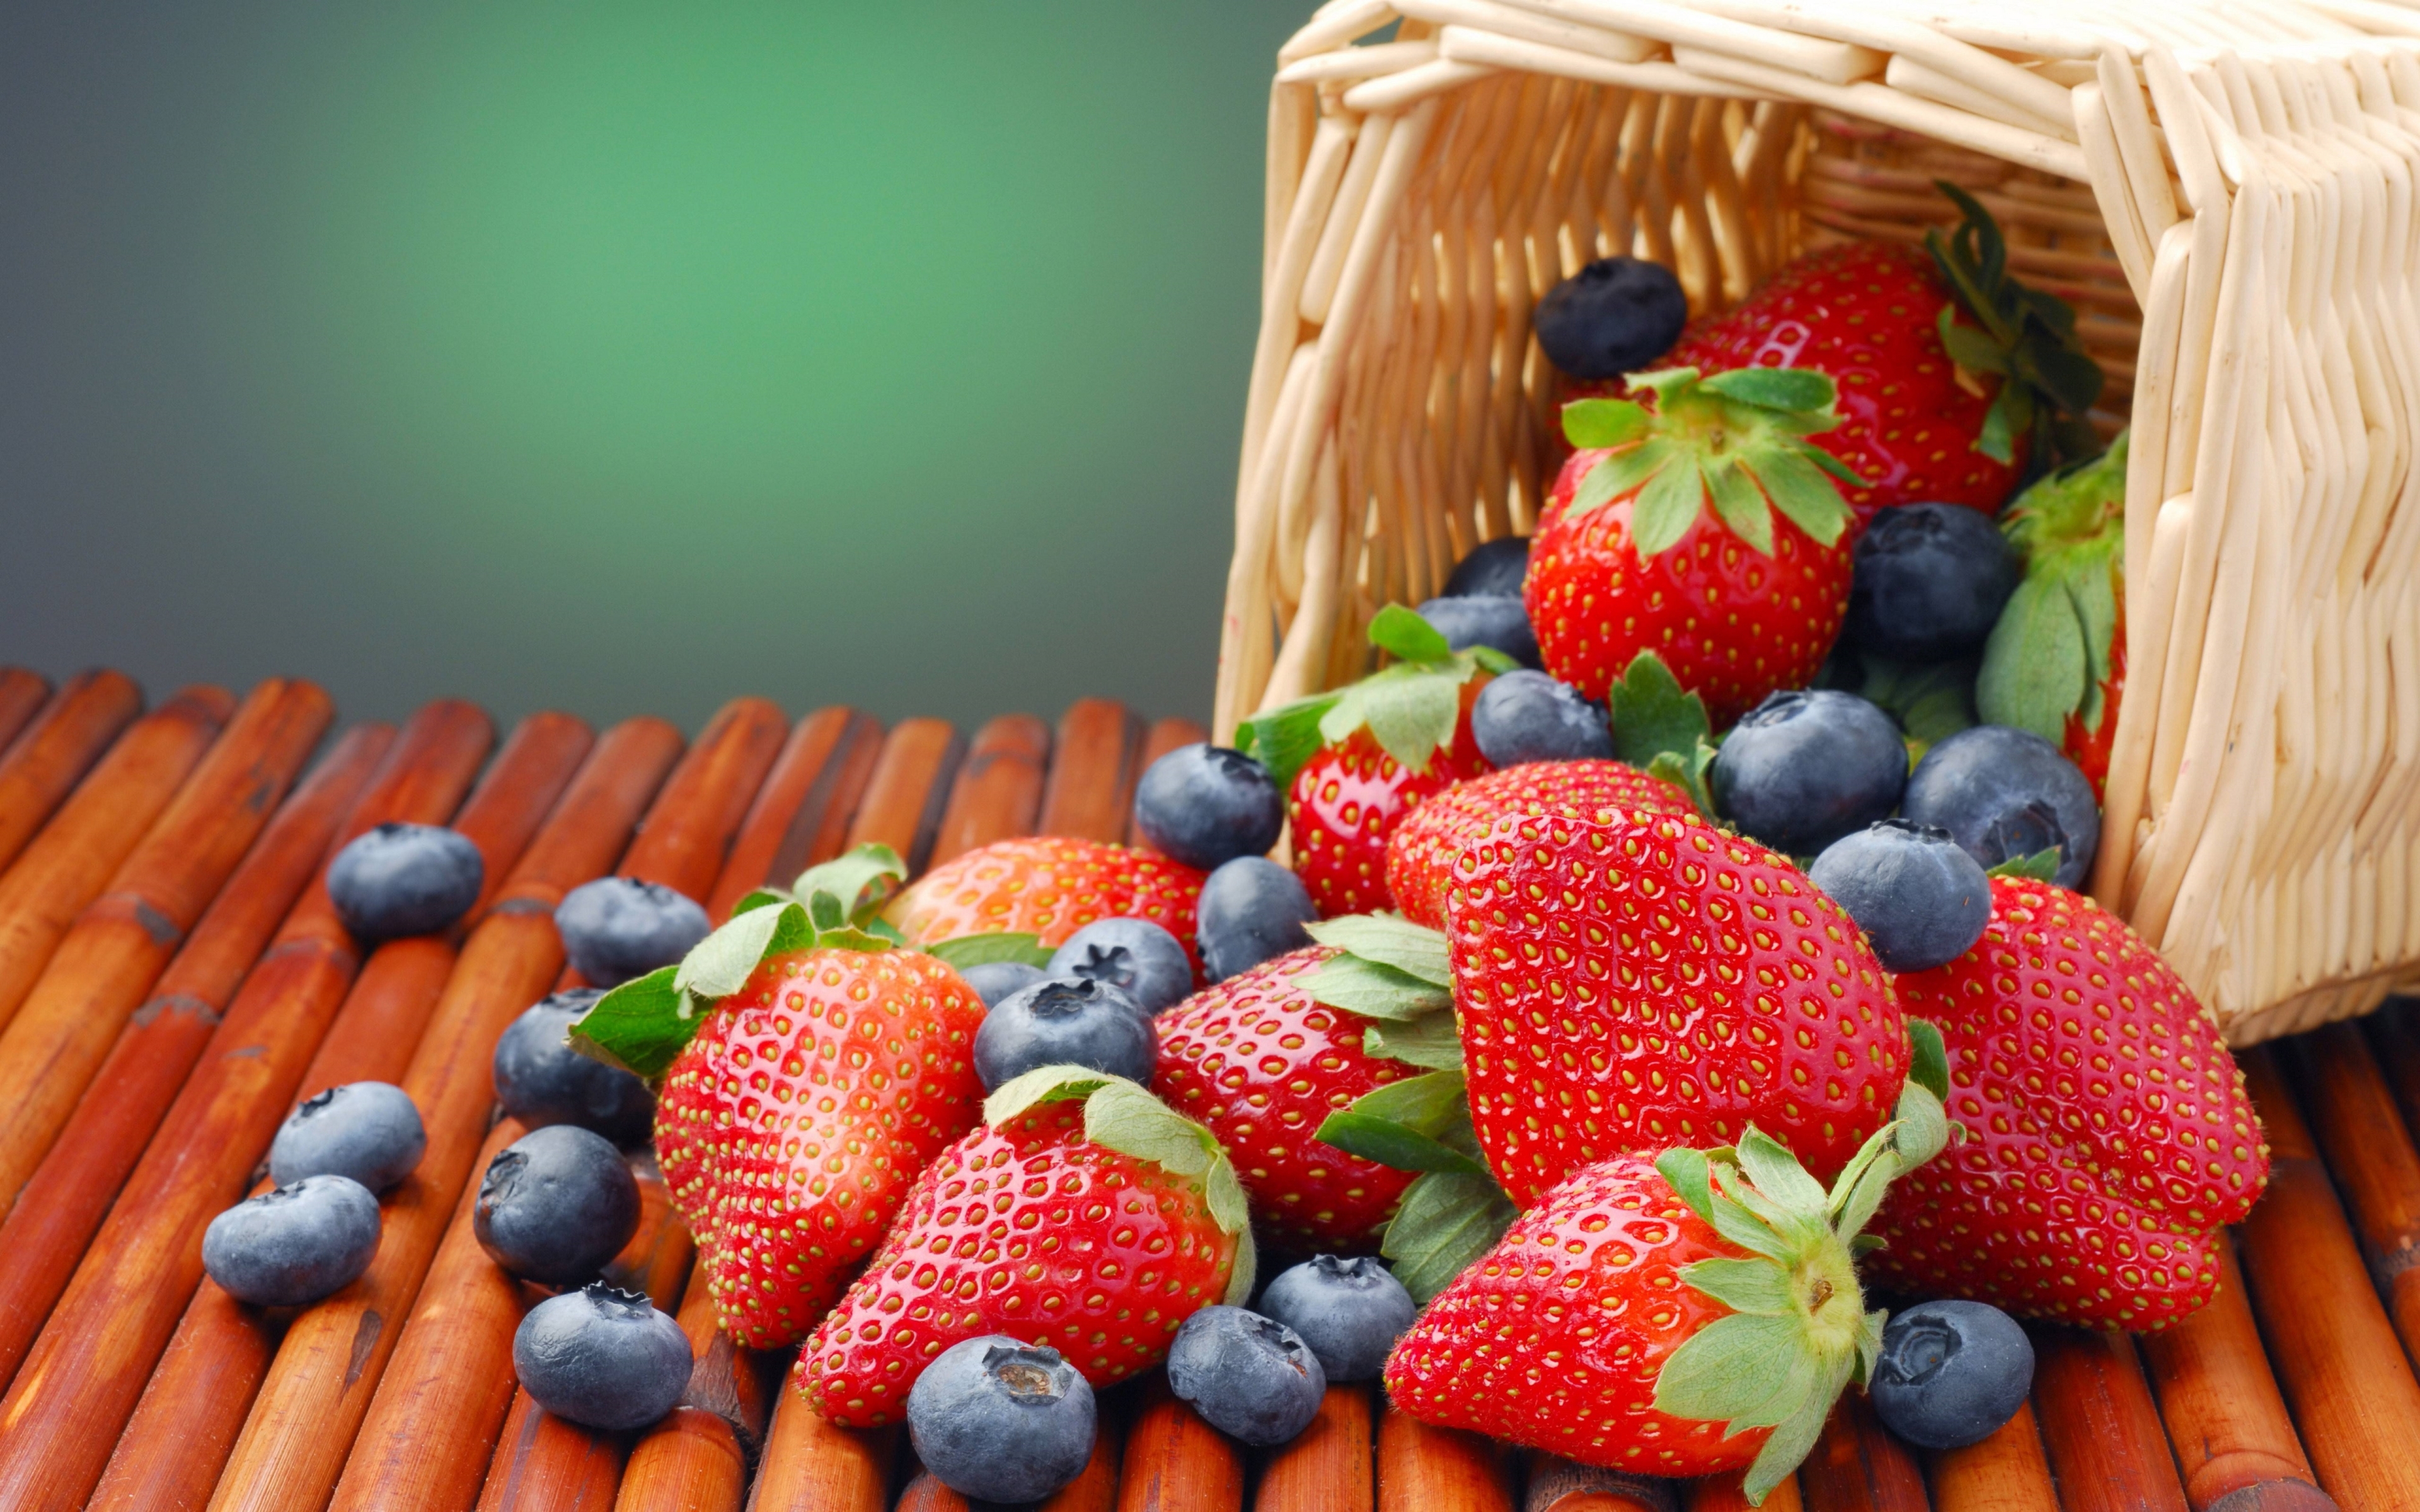 Strawberries in the basket for 3840 x 2400 4K Retina Display resolution